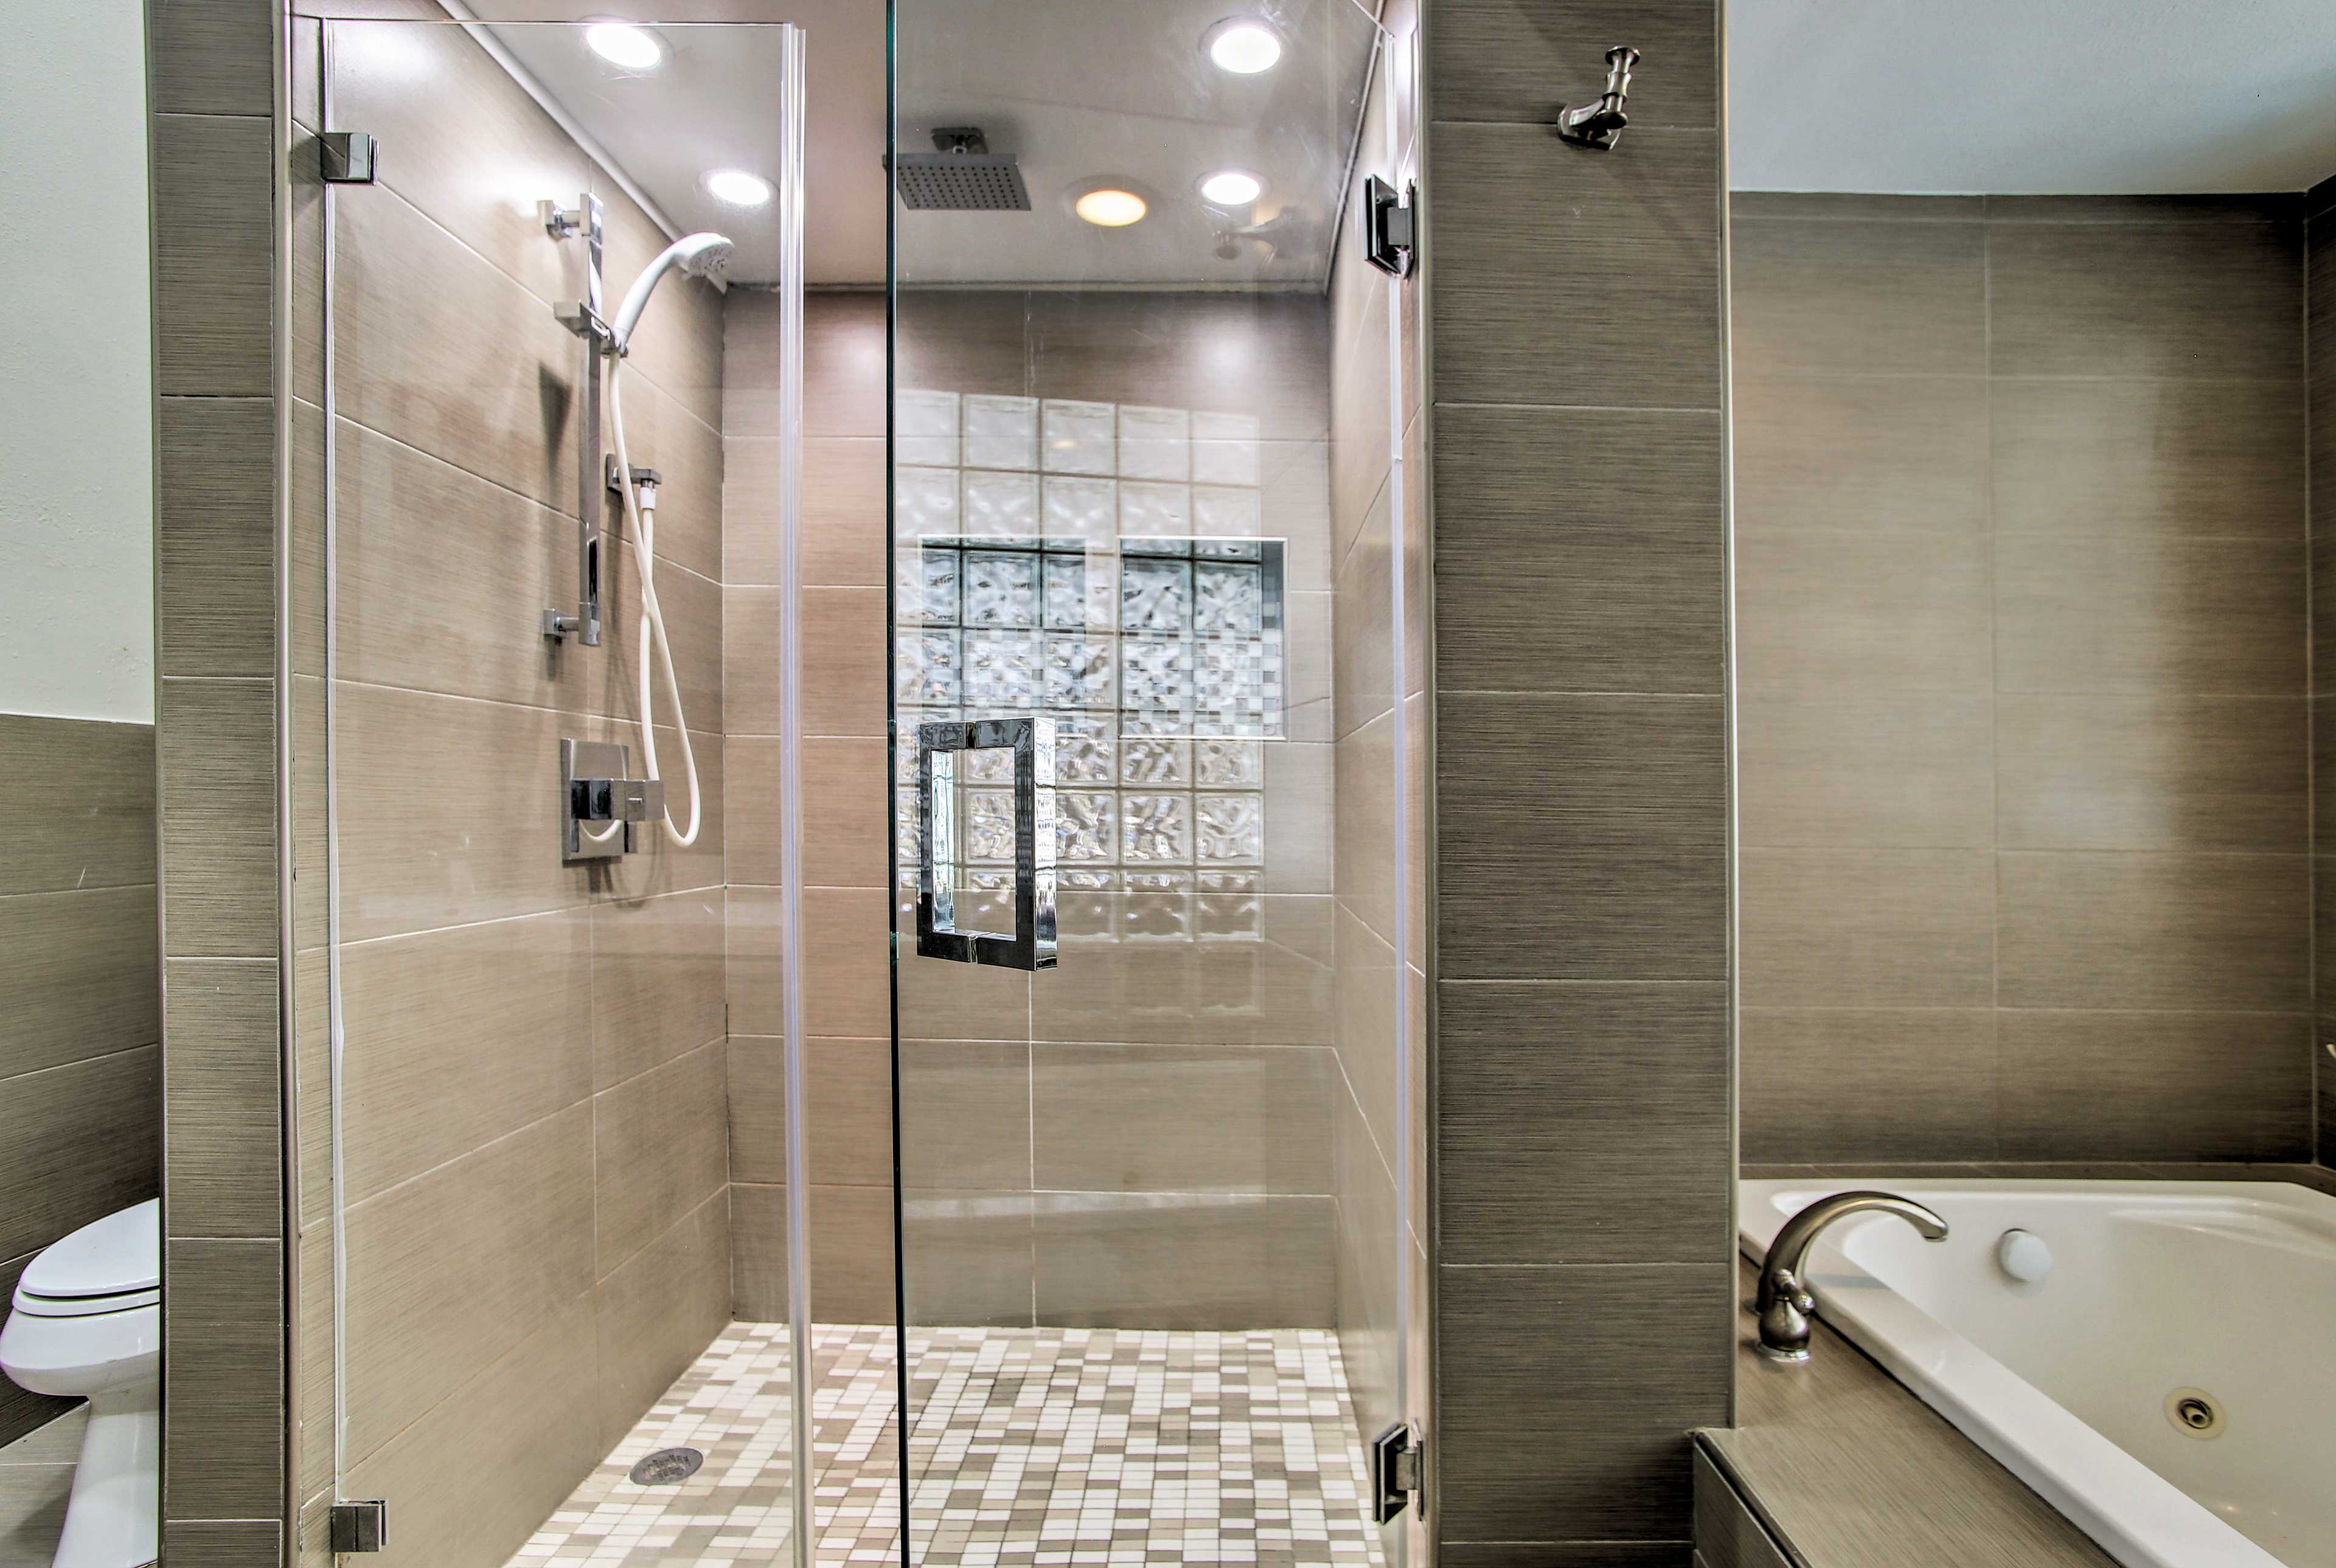 Choose to rinse off in the walk-in shower, or soak in the tub.